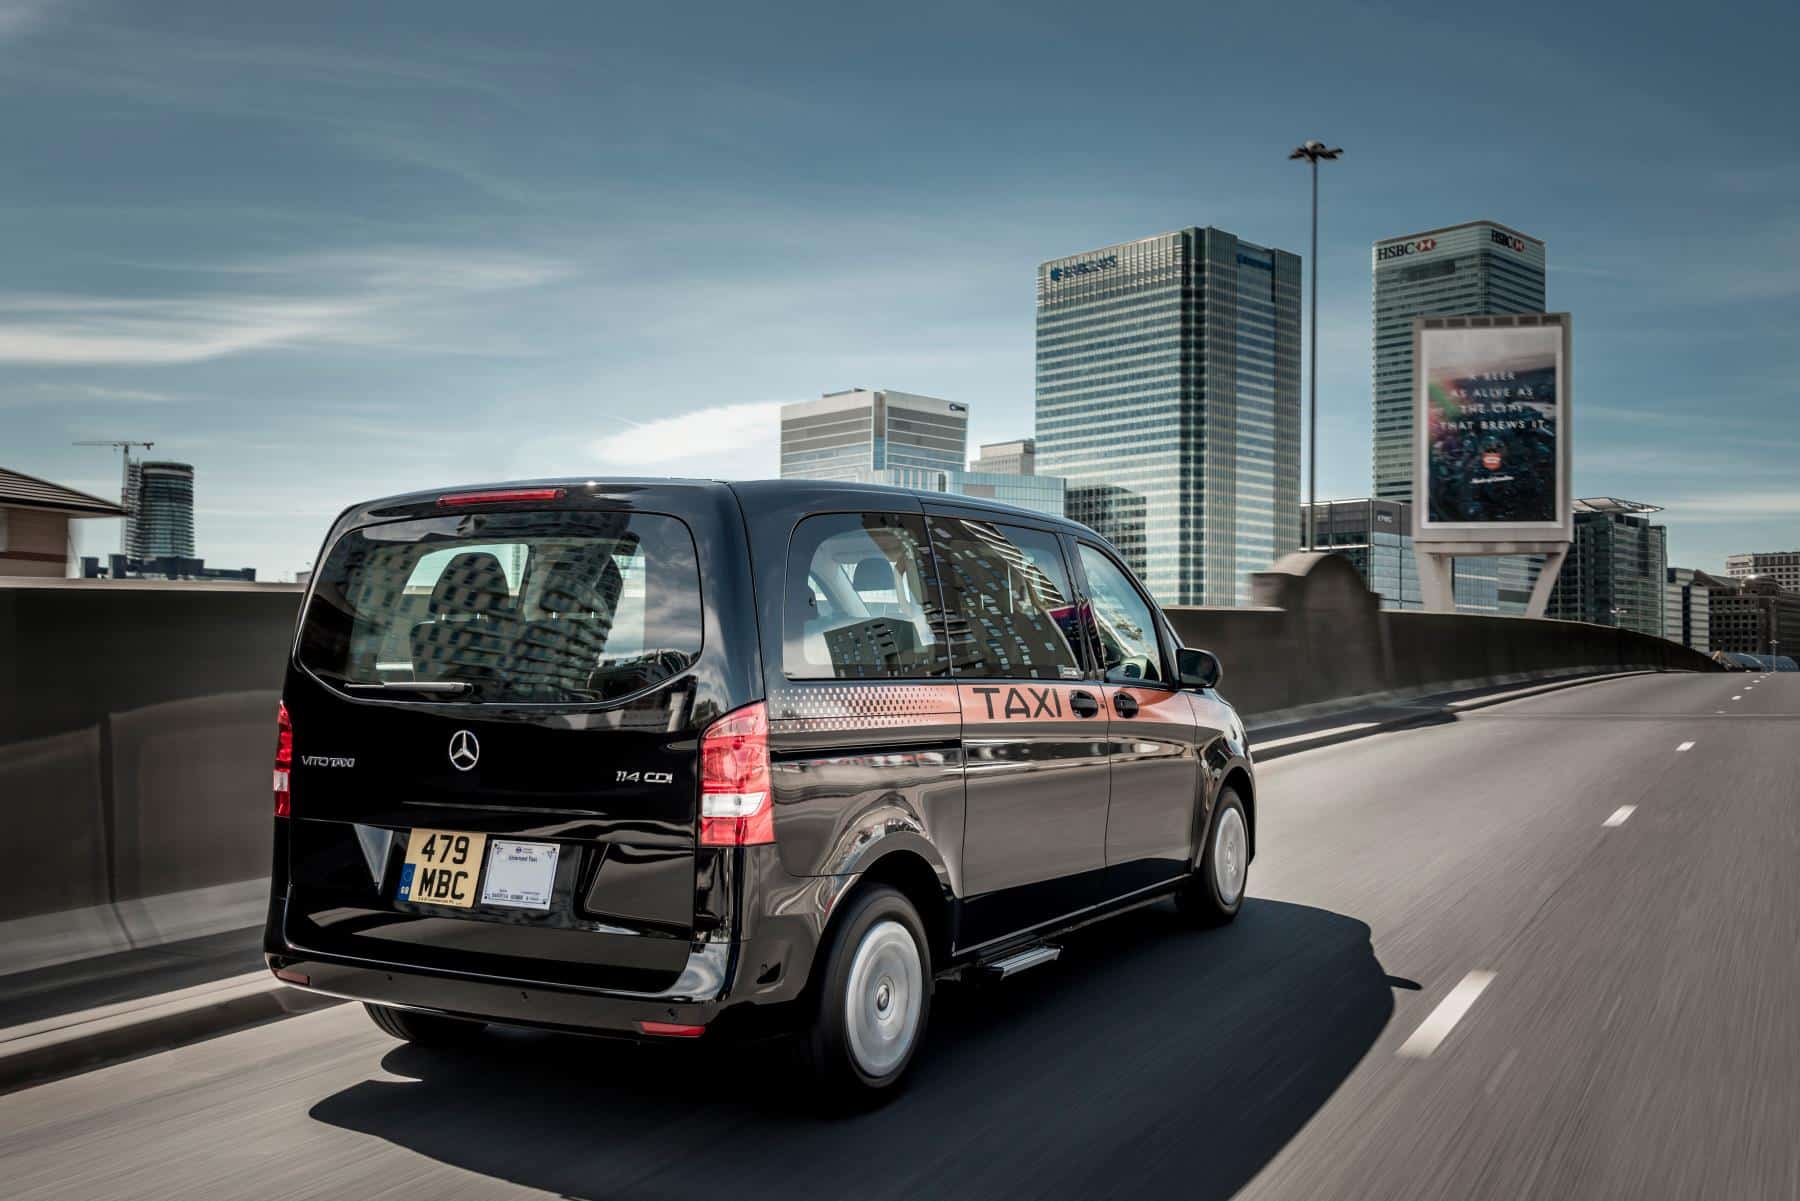 Low emissions - the new Vito Taxi with Euro 6 diesel engines